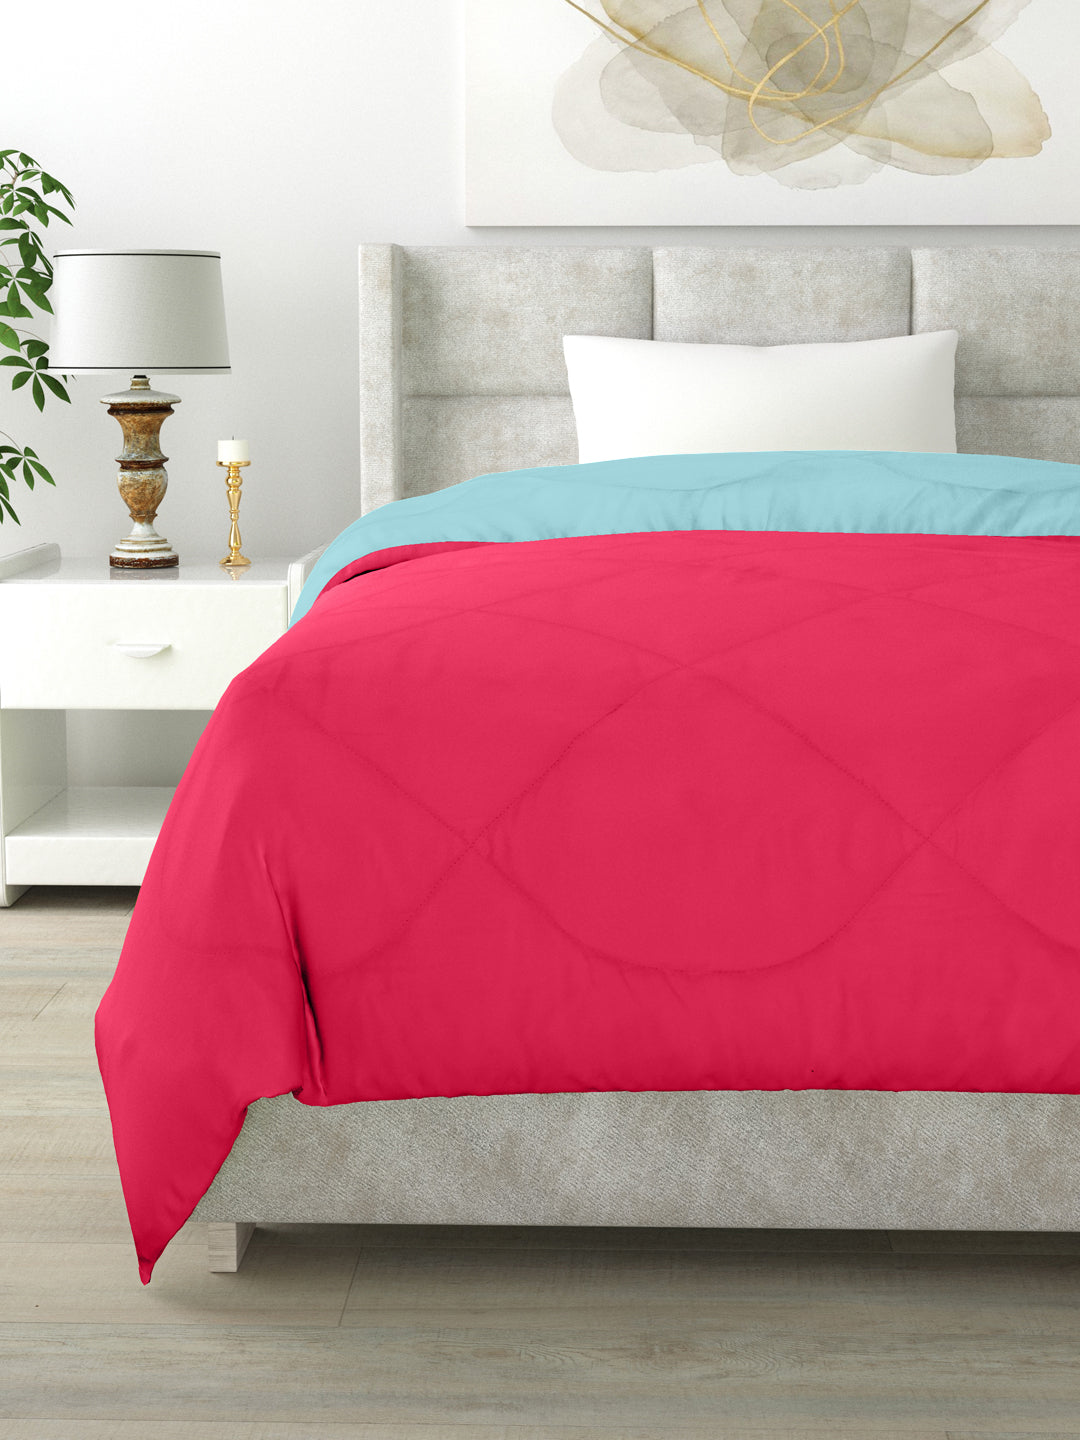 Reversible Single Bed Comforter 200 GSM 60x90 Inches (Pink & Aqua Blue)